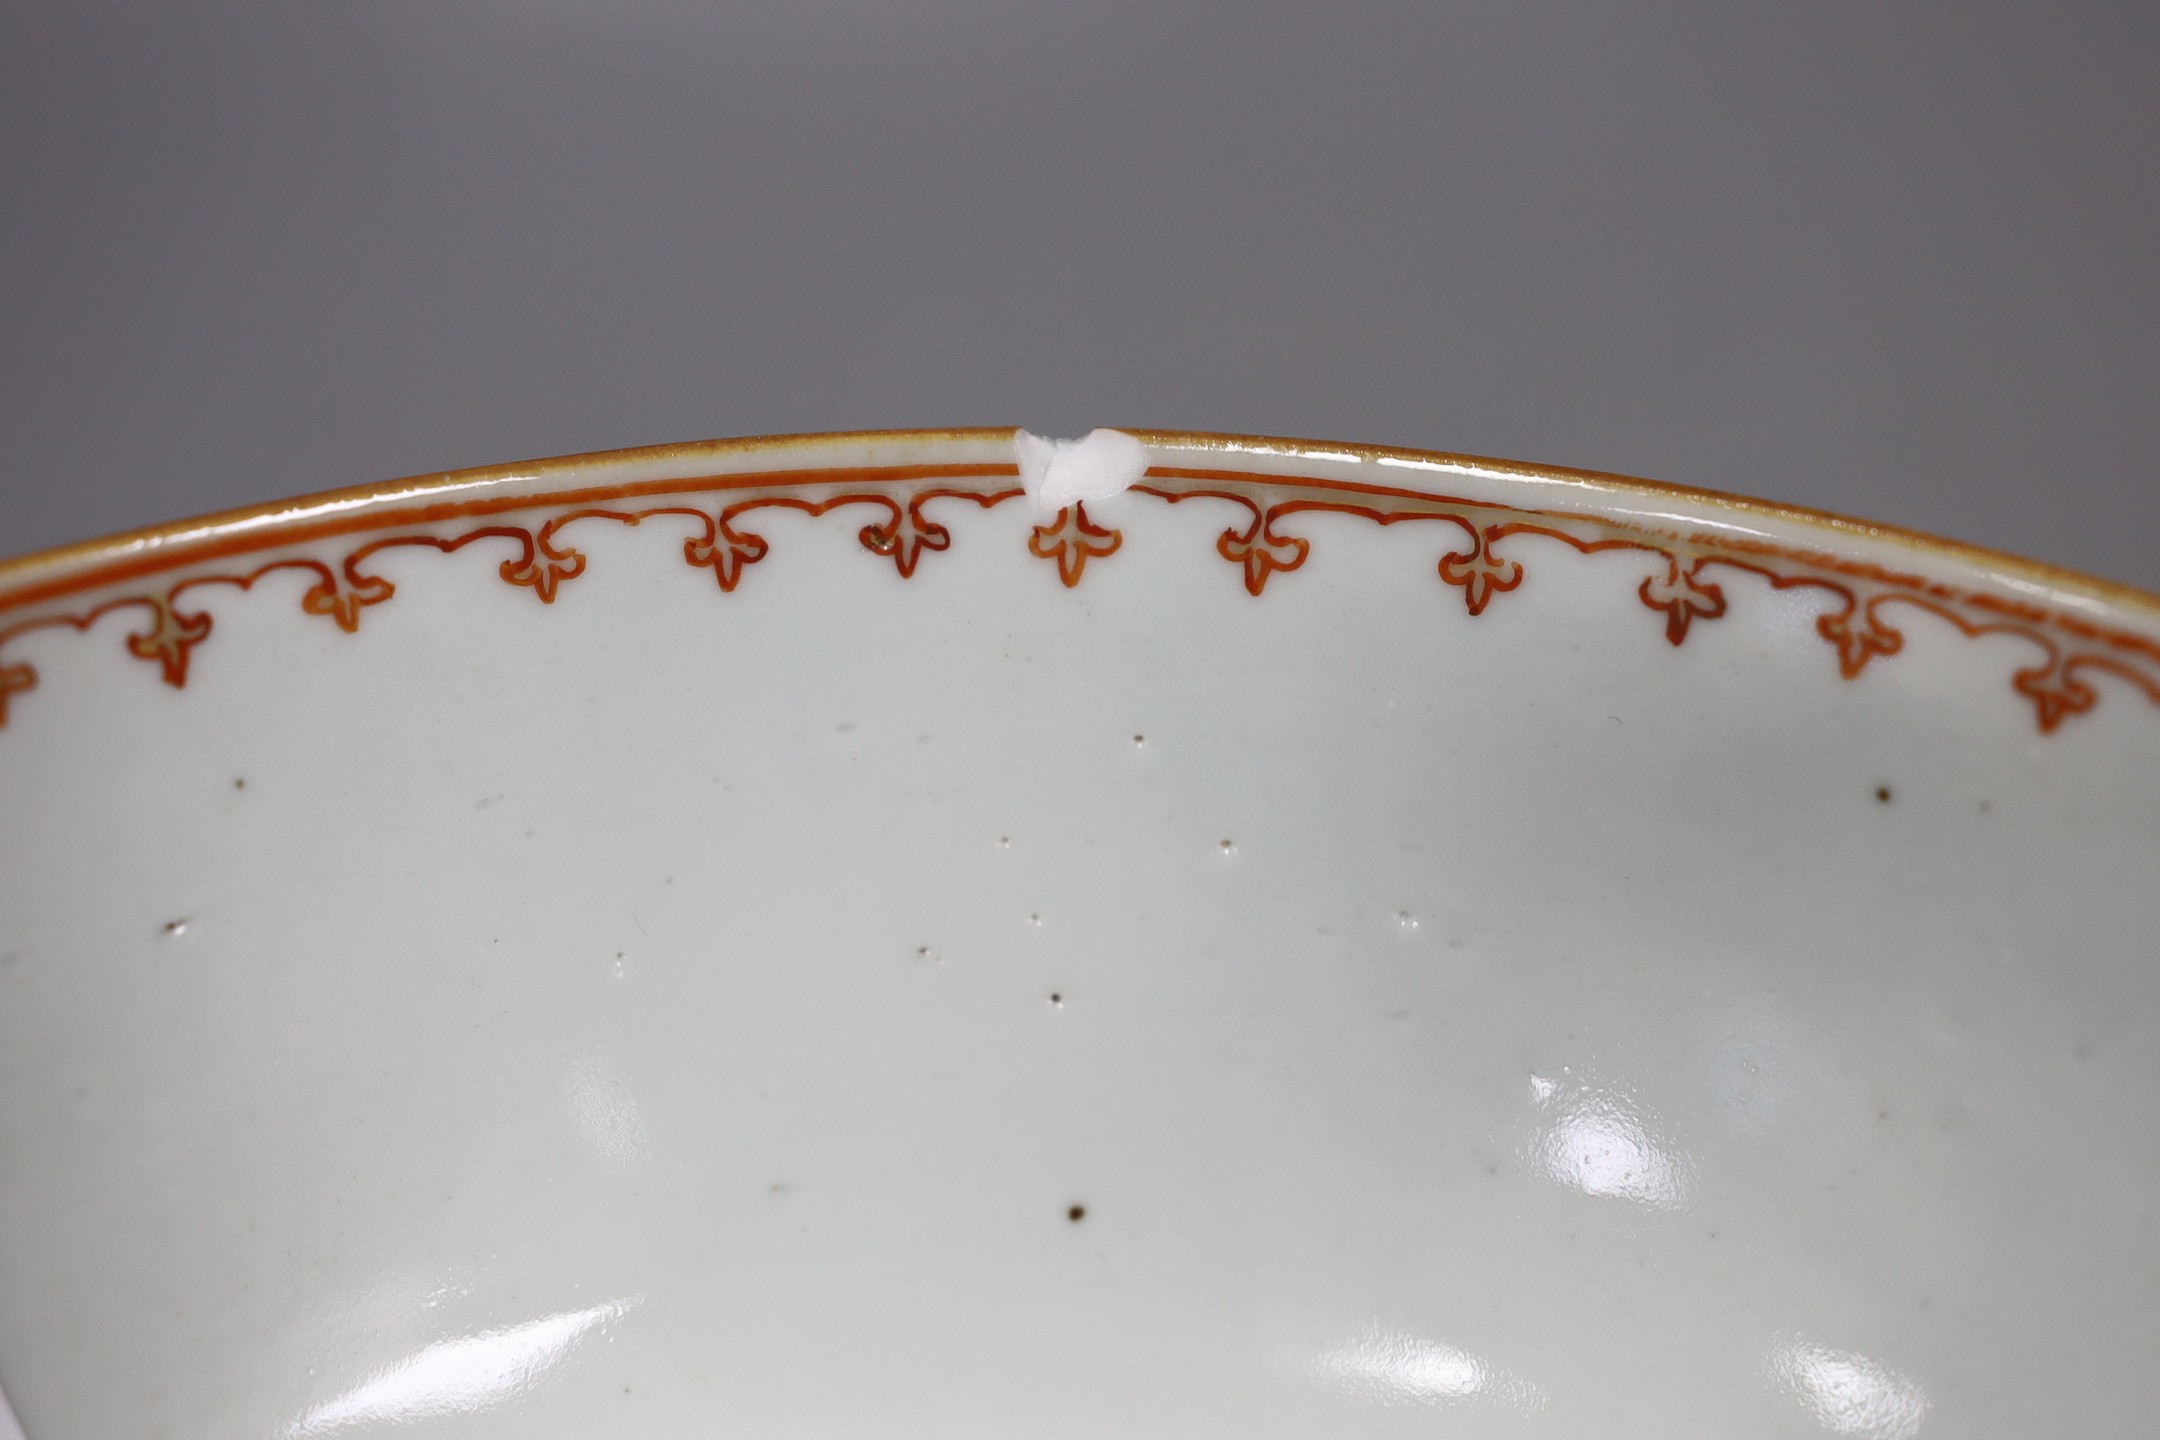 An 18th century Chinese export famille rose bowl, 20cm diameter